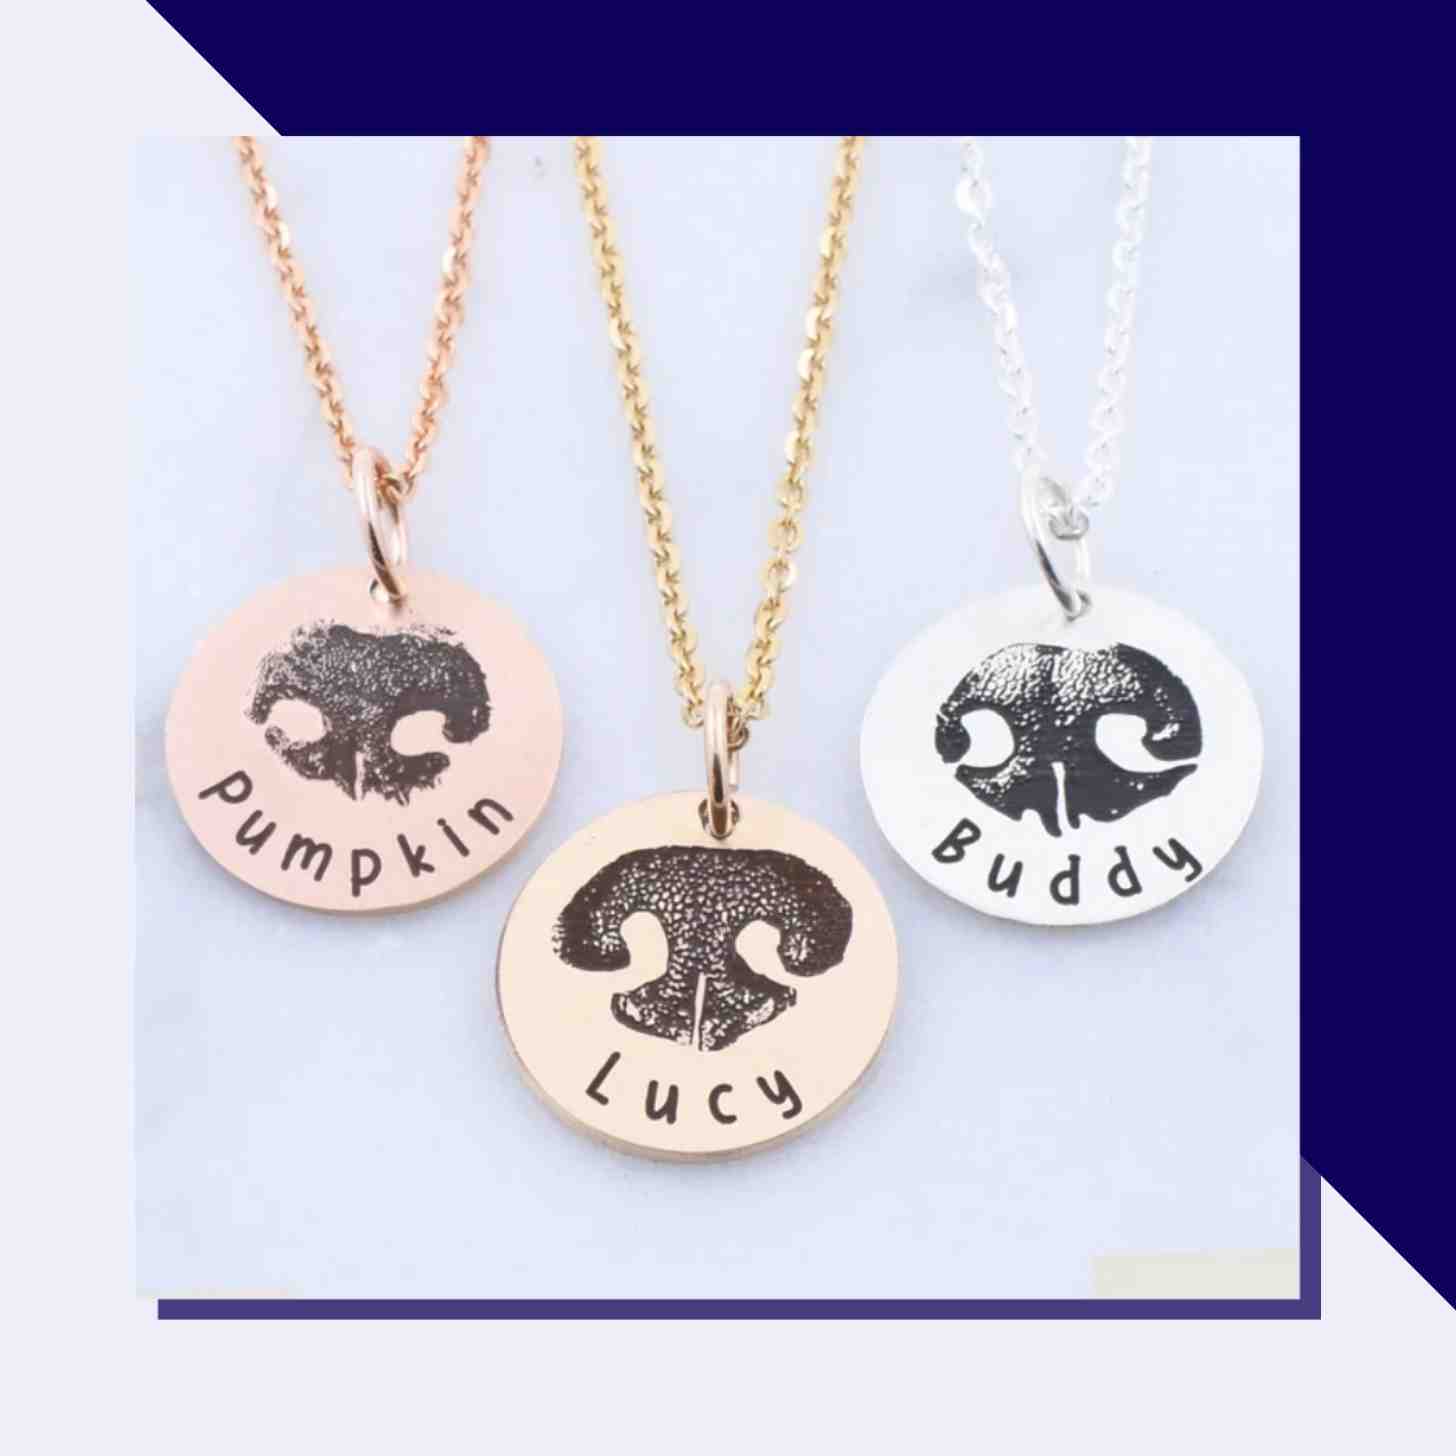 Three Perzonalized Necklaces With Dog Noses Engraved On Them